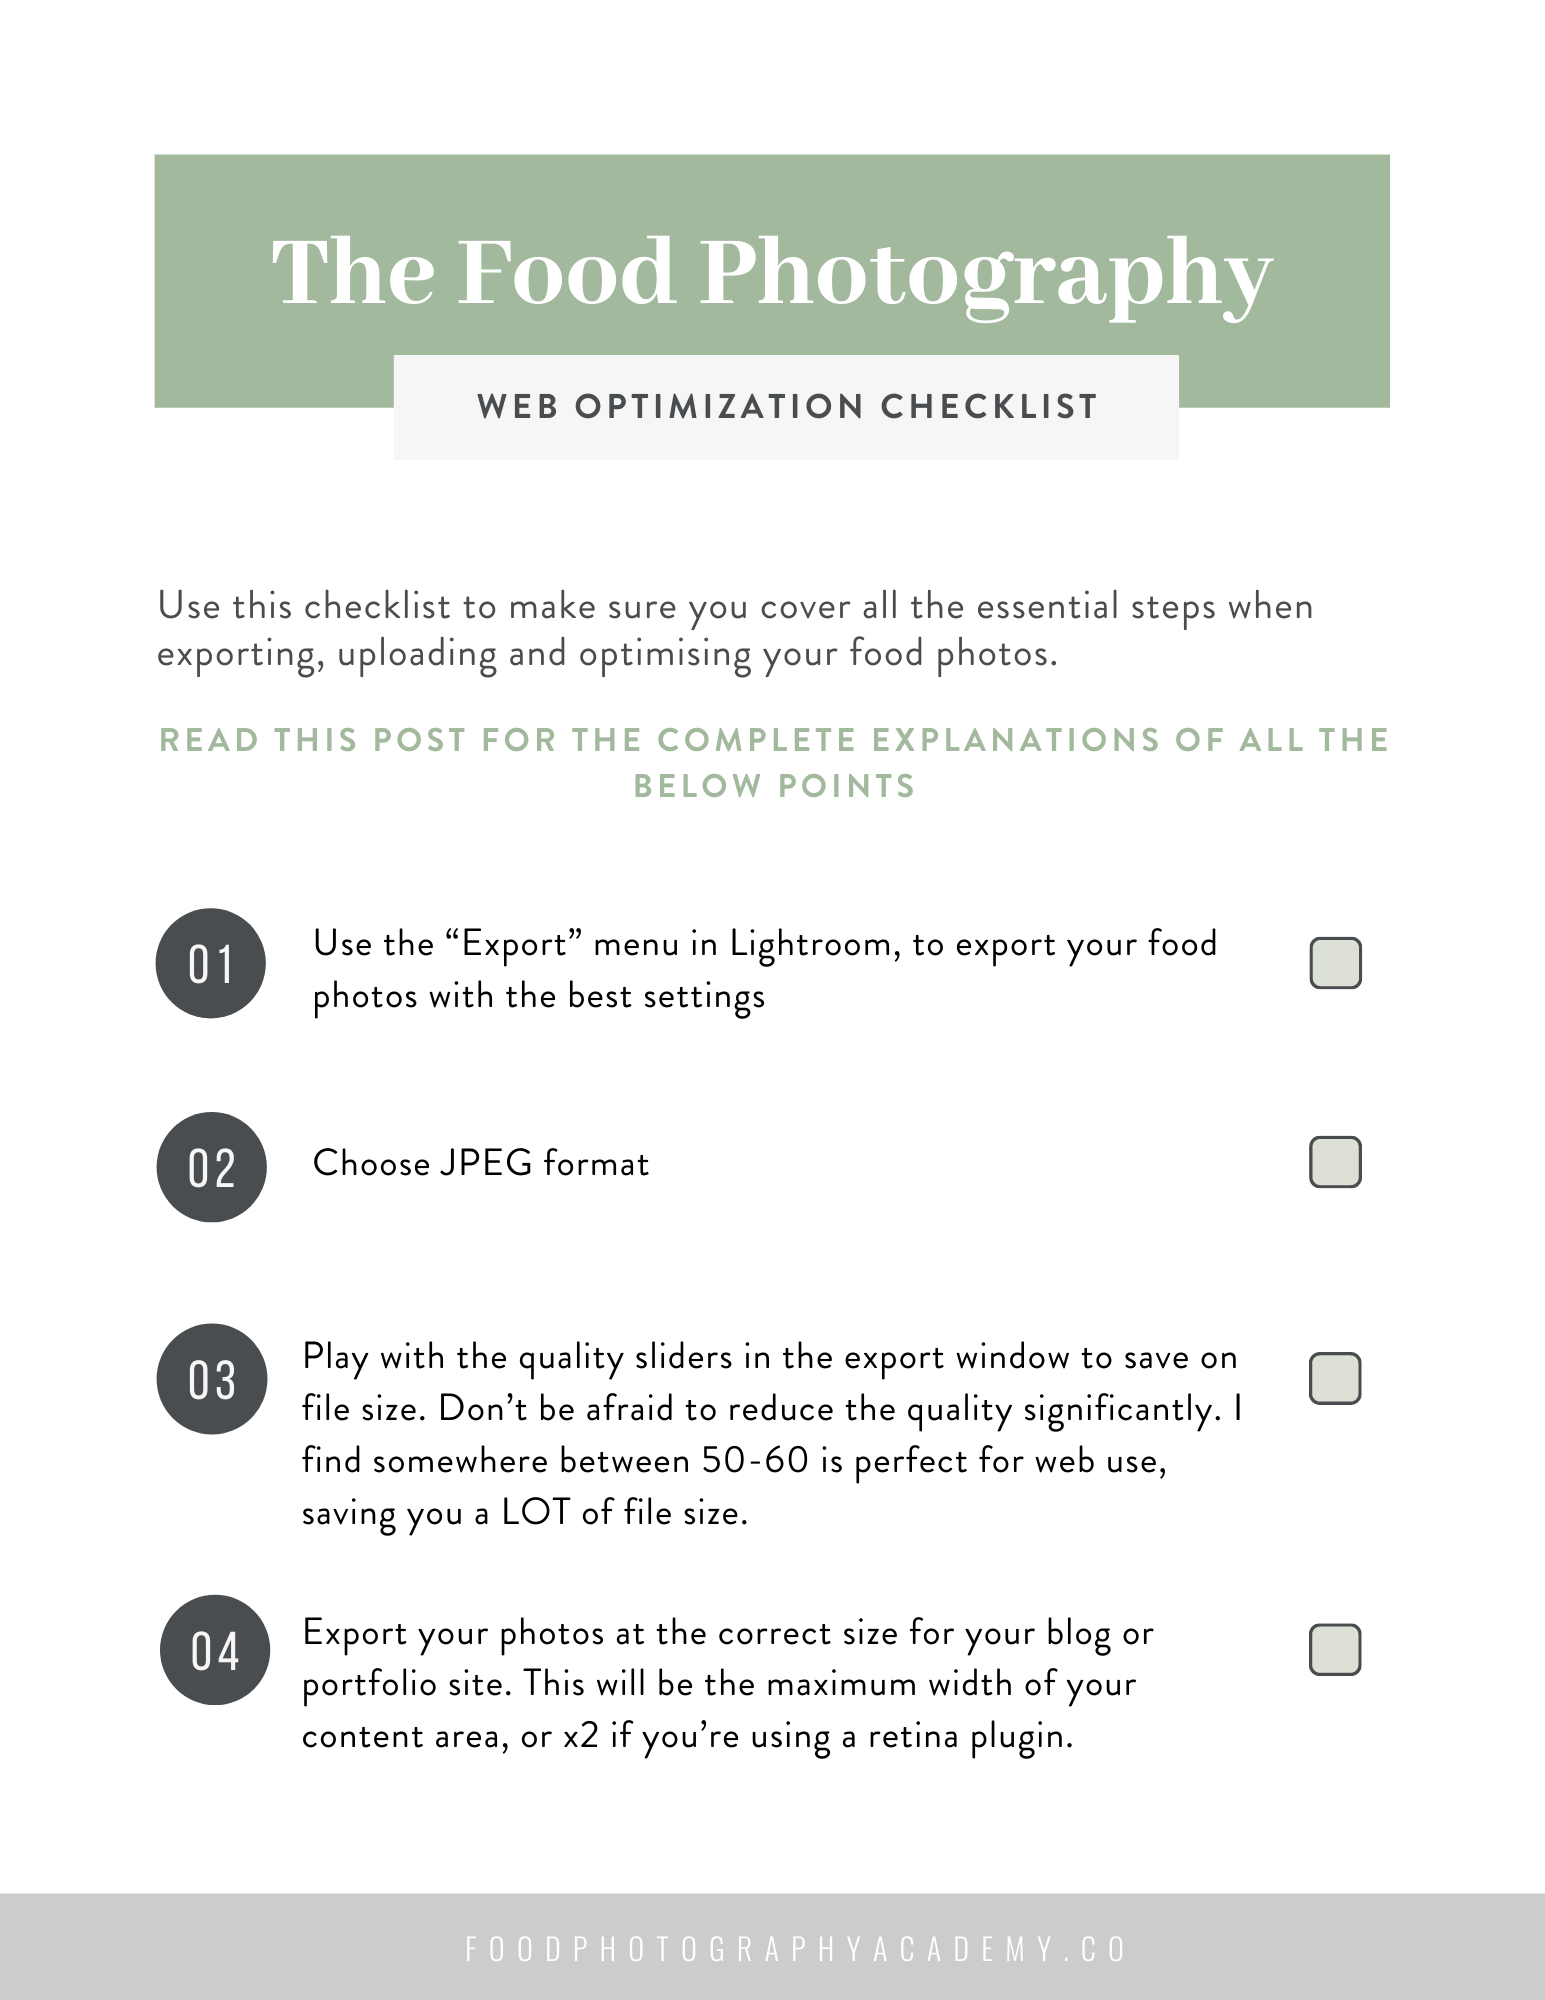 Steps to Optimize Your Photos for the Web